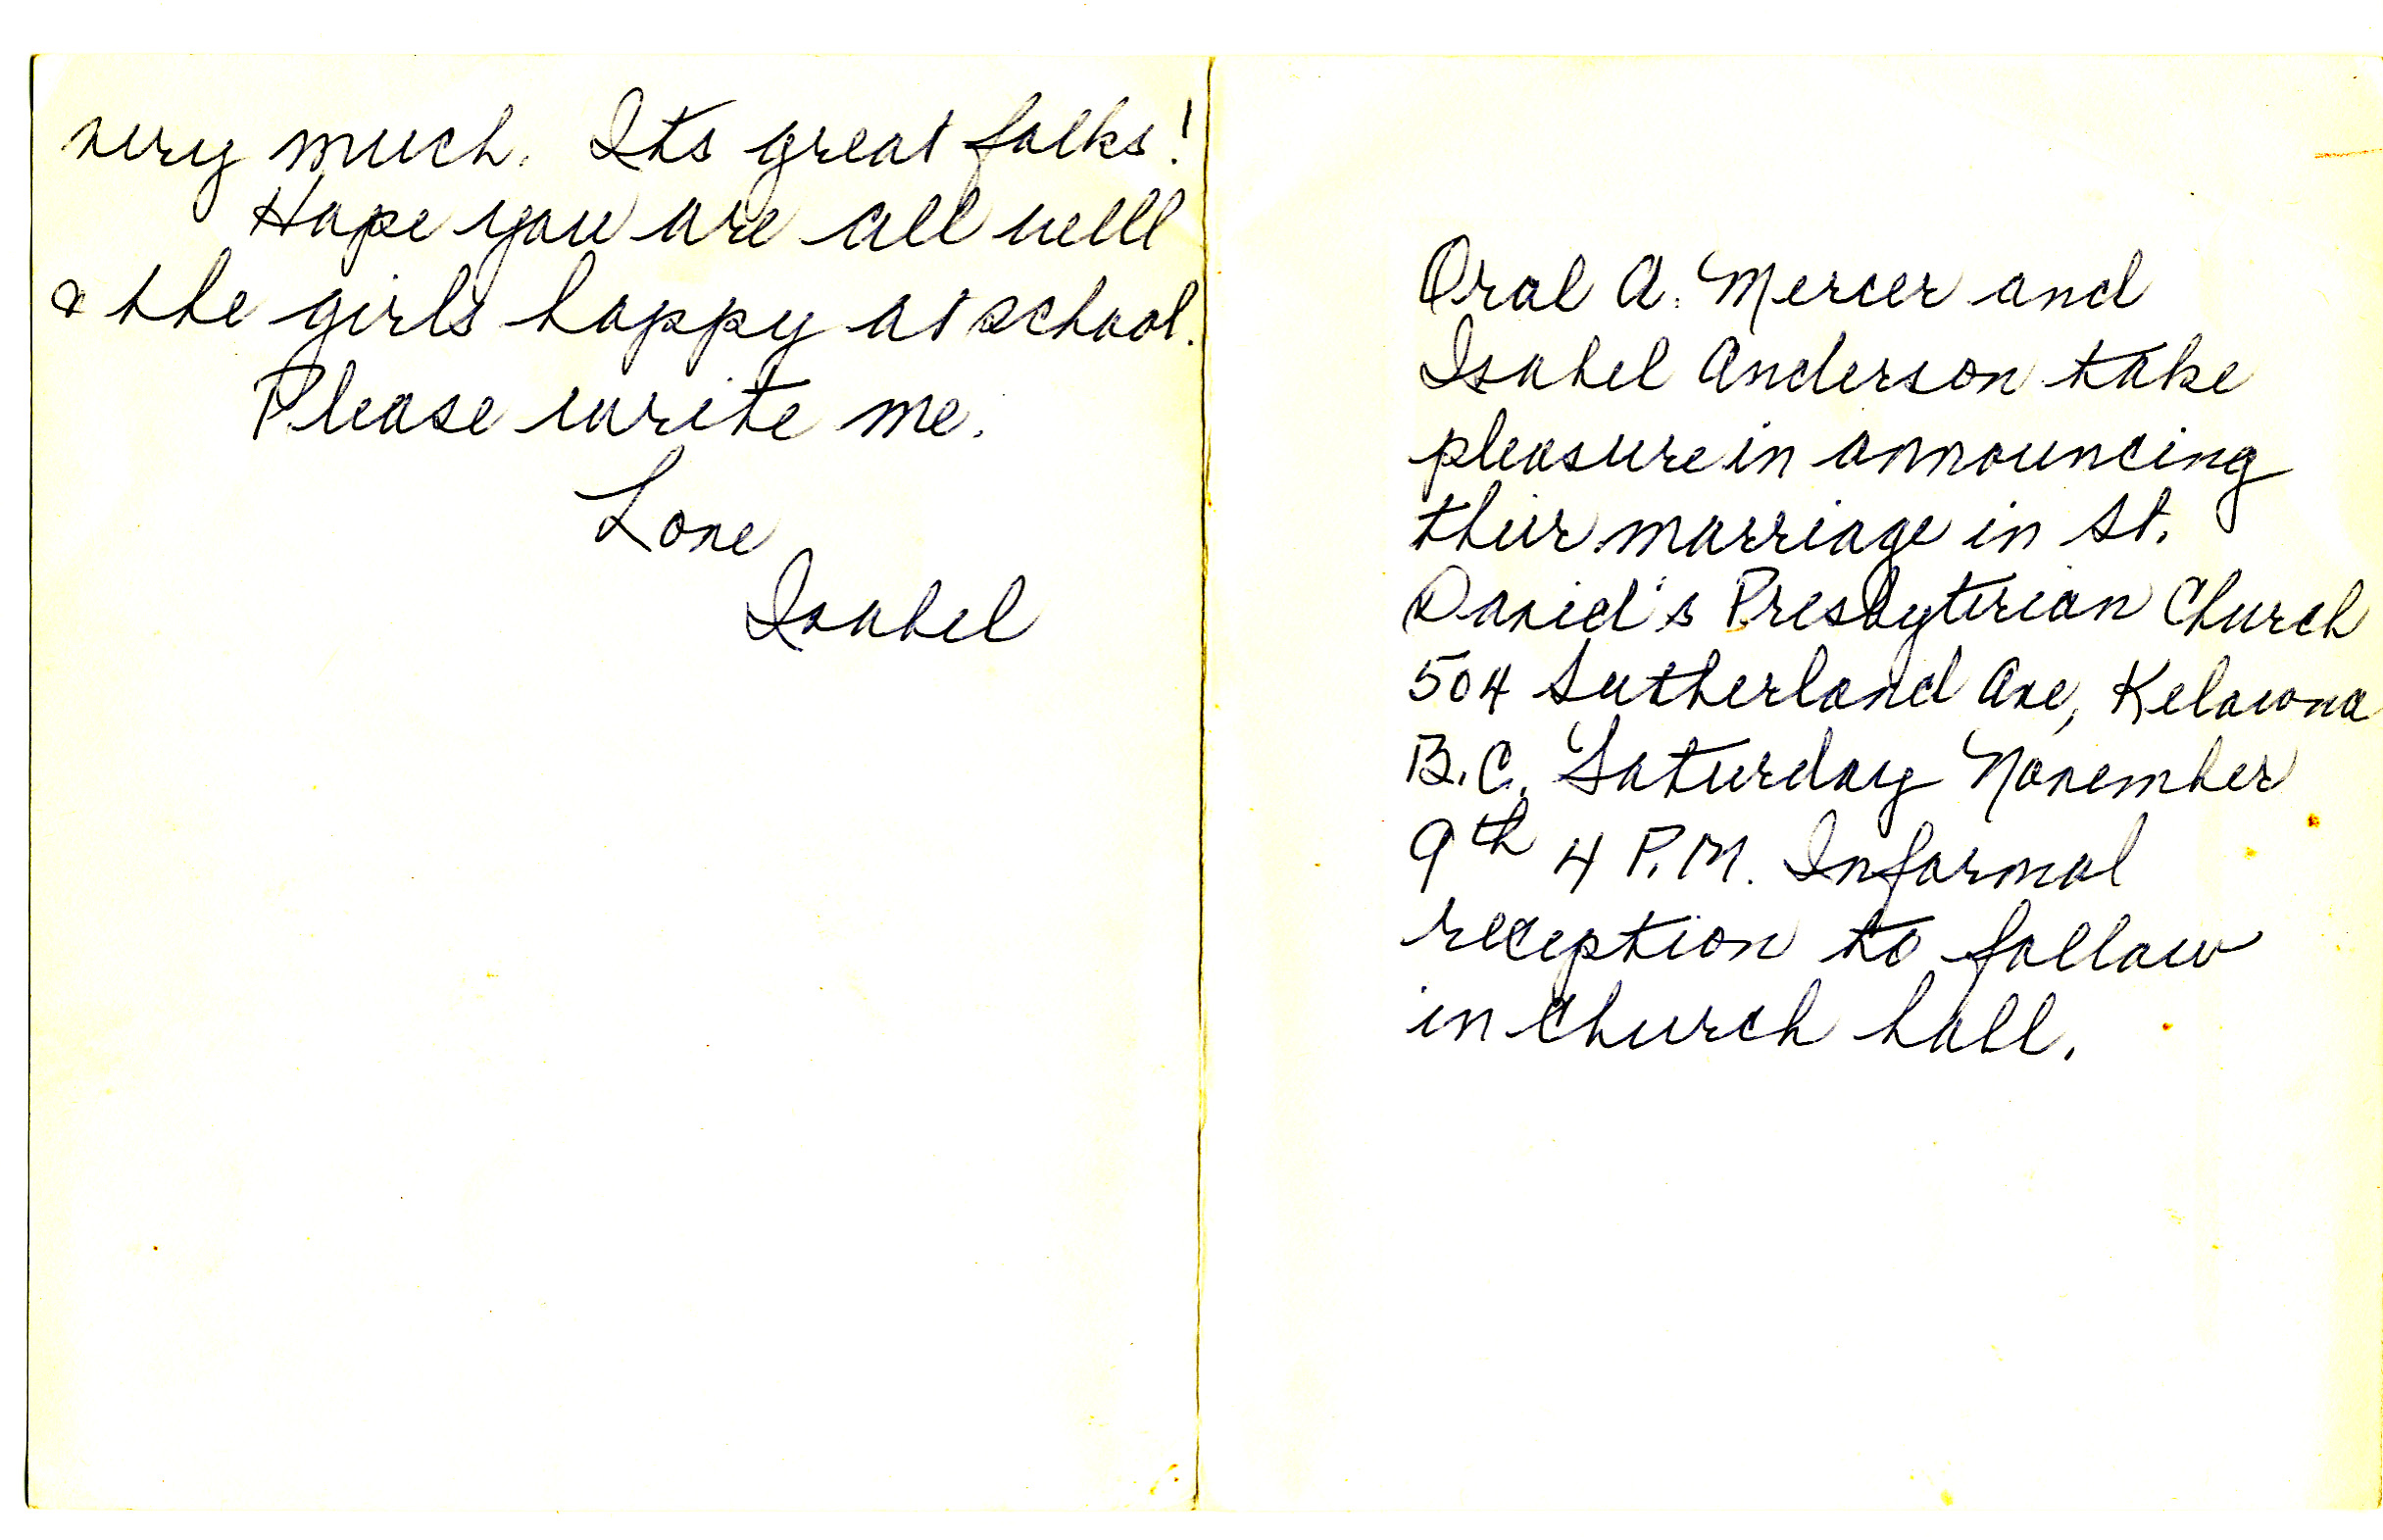 isobels note to Jan anderson on second marriage